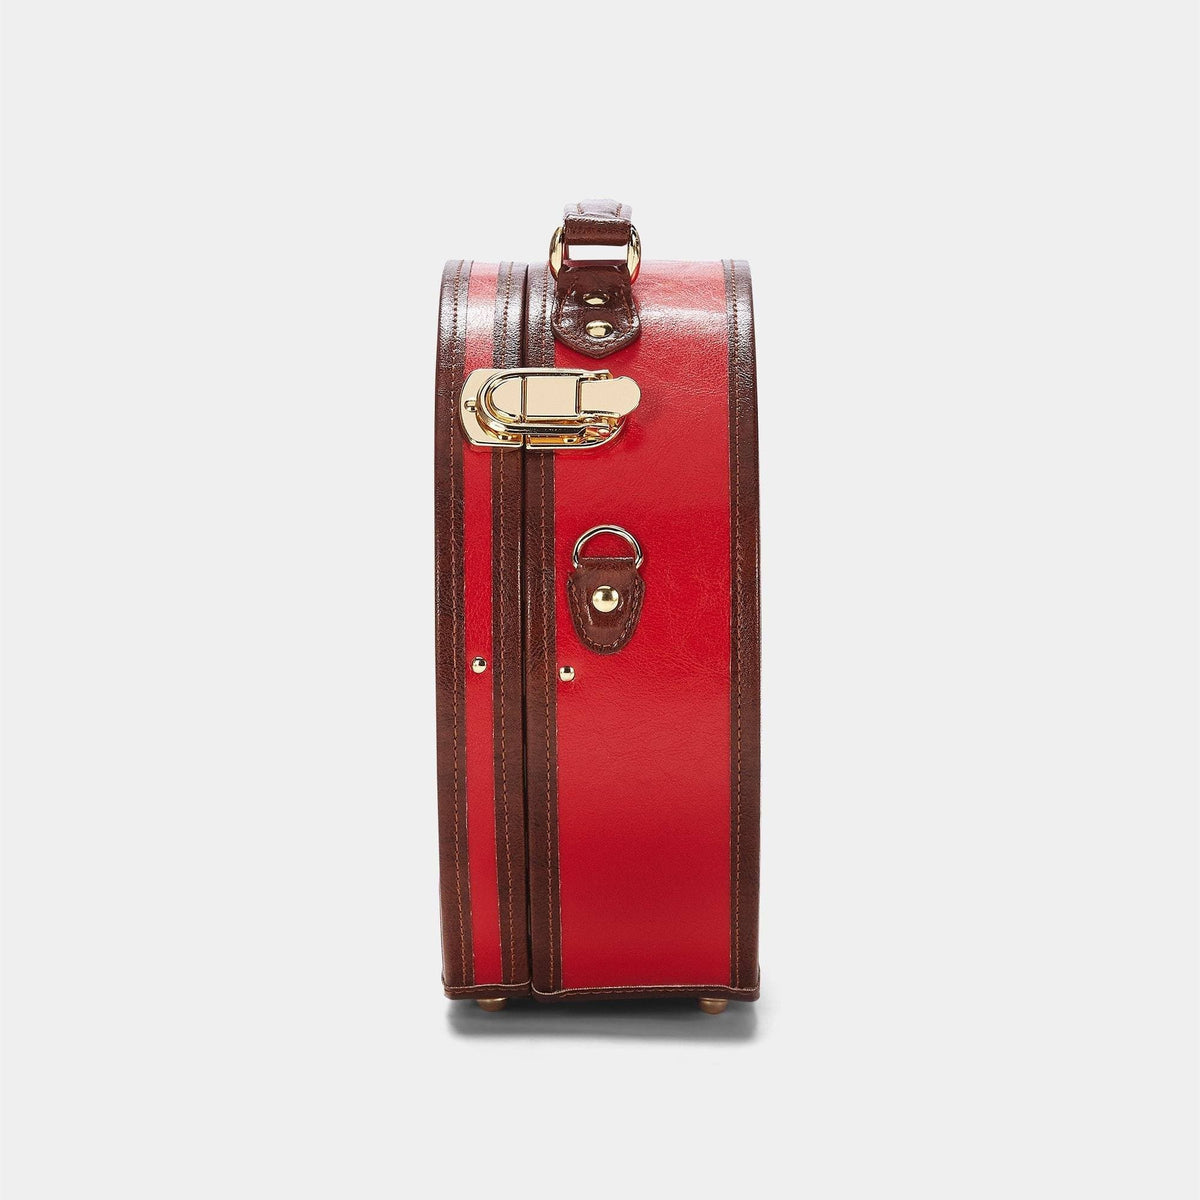 The Entrepreneur - Red Small Hatbox Hatbox Small Steamline Luggage 